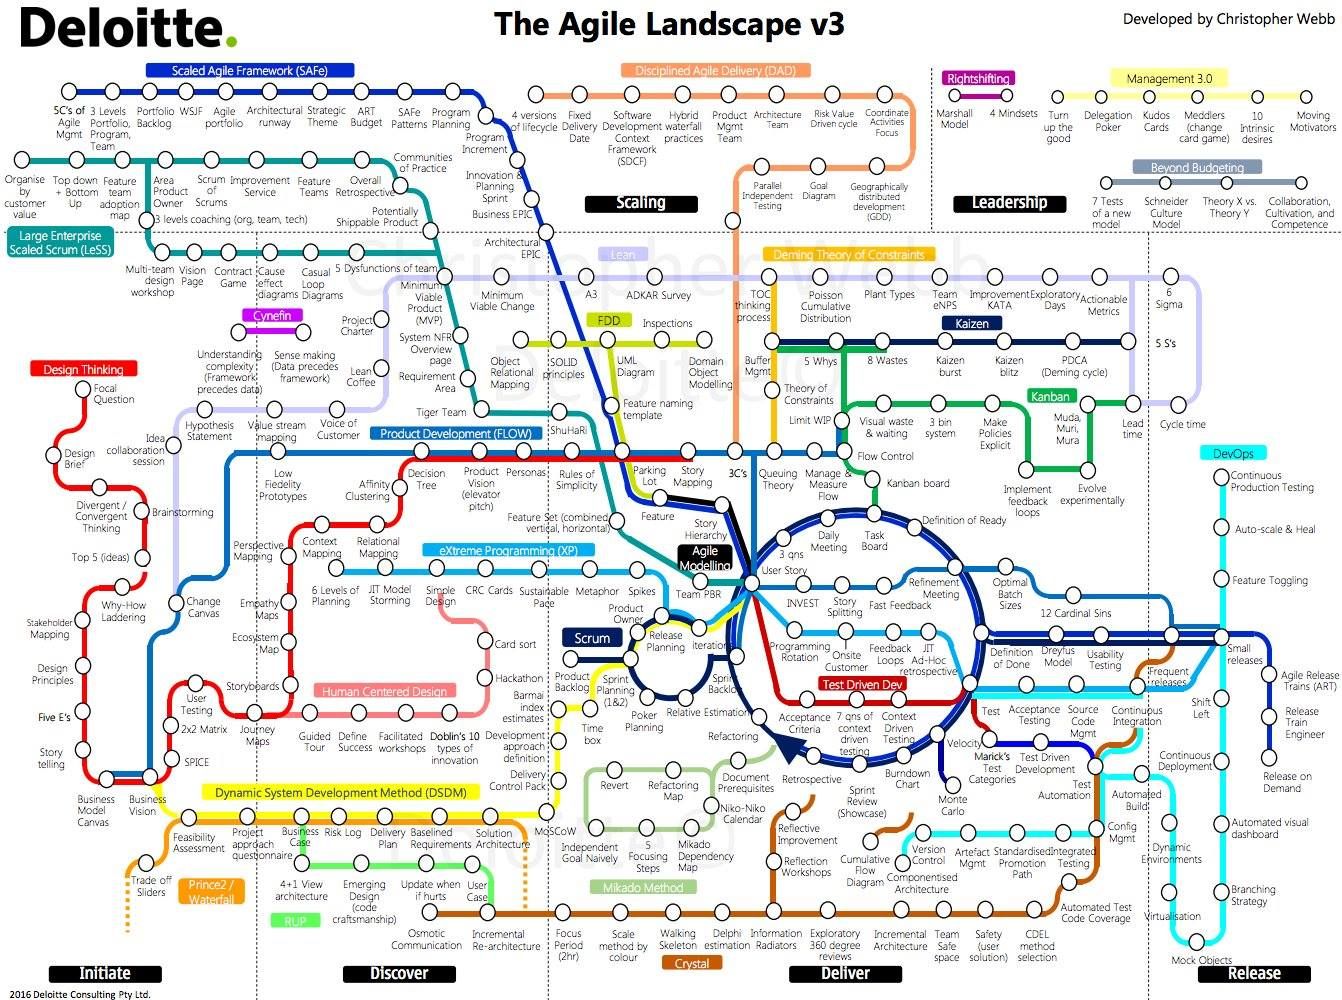 The Agile Landscape in the style of the London tube map v3